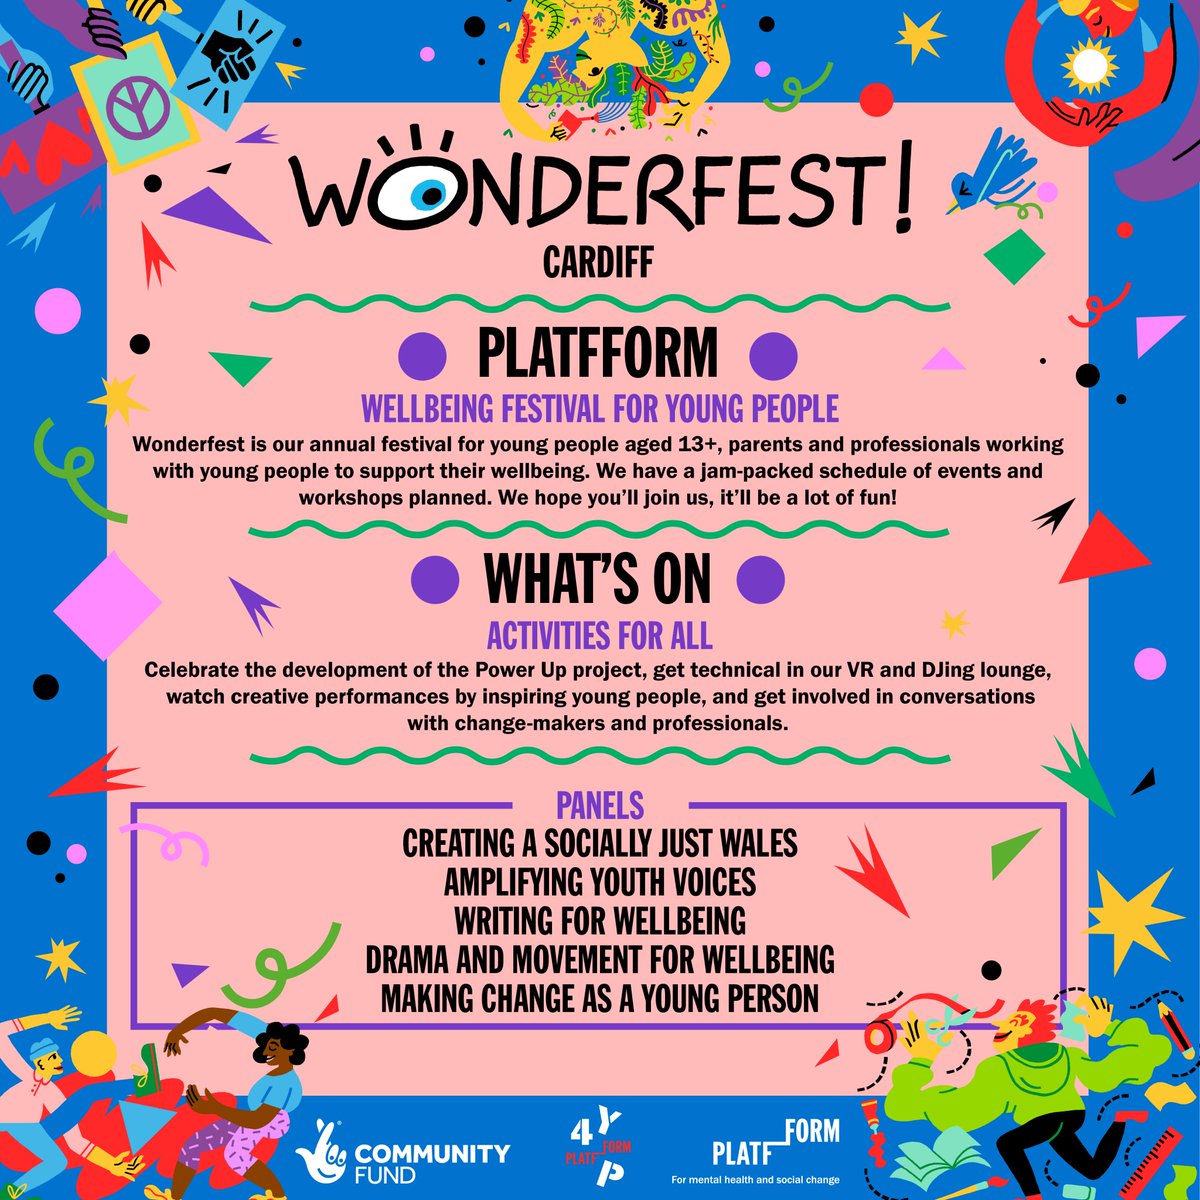 We are so looking forward to #Wonderfest in #Cardiff this Sunday and welcoming our wonderful guests including young people, @childcomwales @lynne_neagle @DebbieAustinSW @shavtaj @YouthCardiff @_thisplace_arts @tayloredmonds 🗓️11/06 📍Glamorgan Cricket Ground, Sophia Gardens